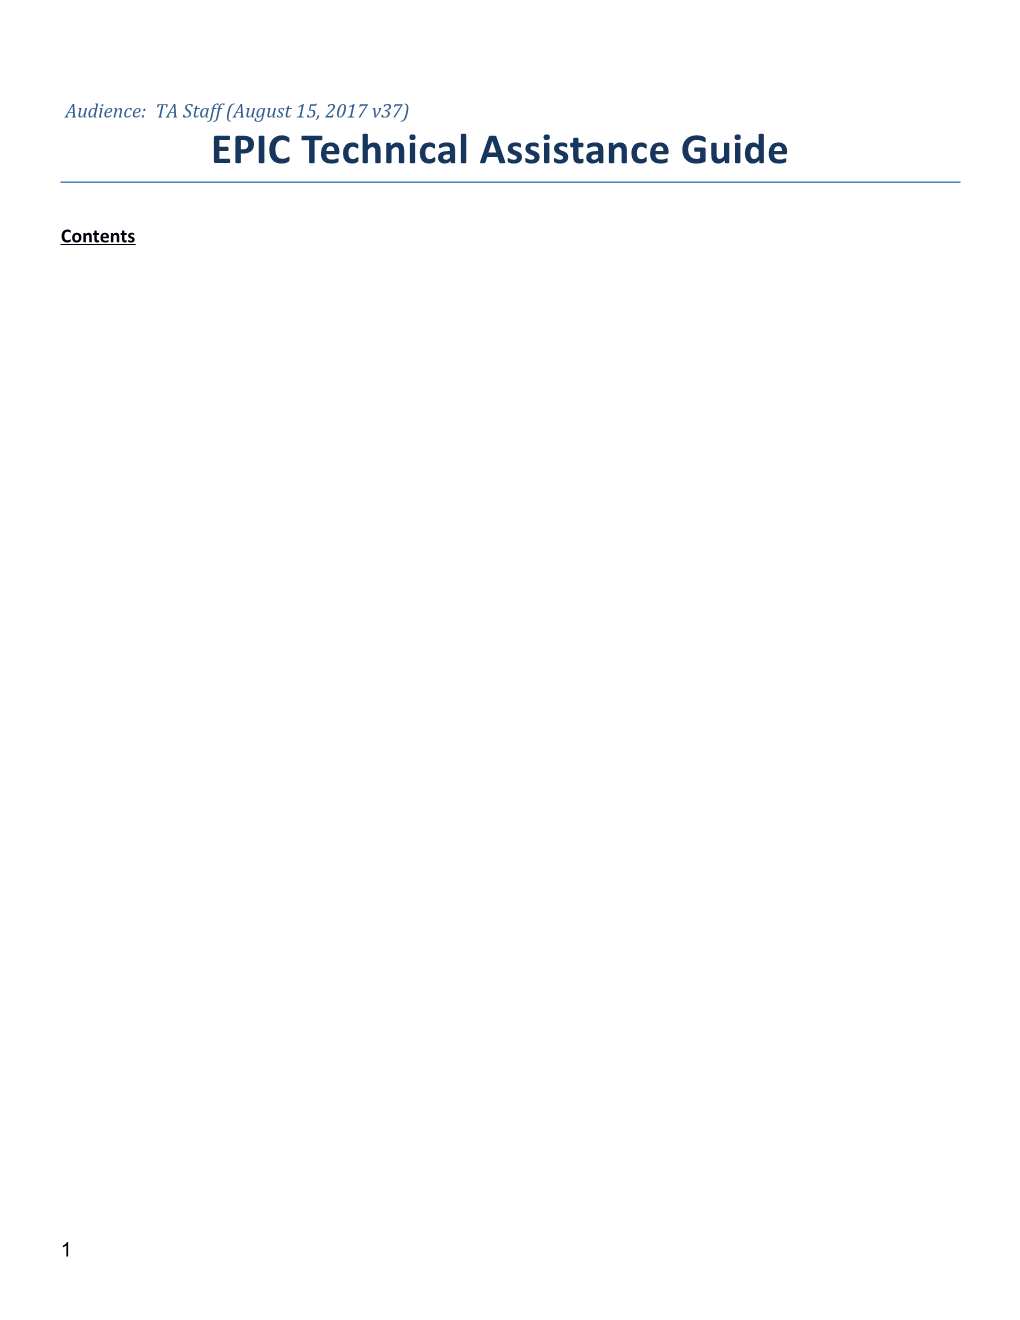 EPIC Technical Assistance Guide